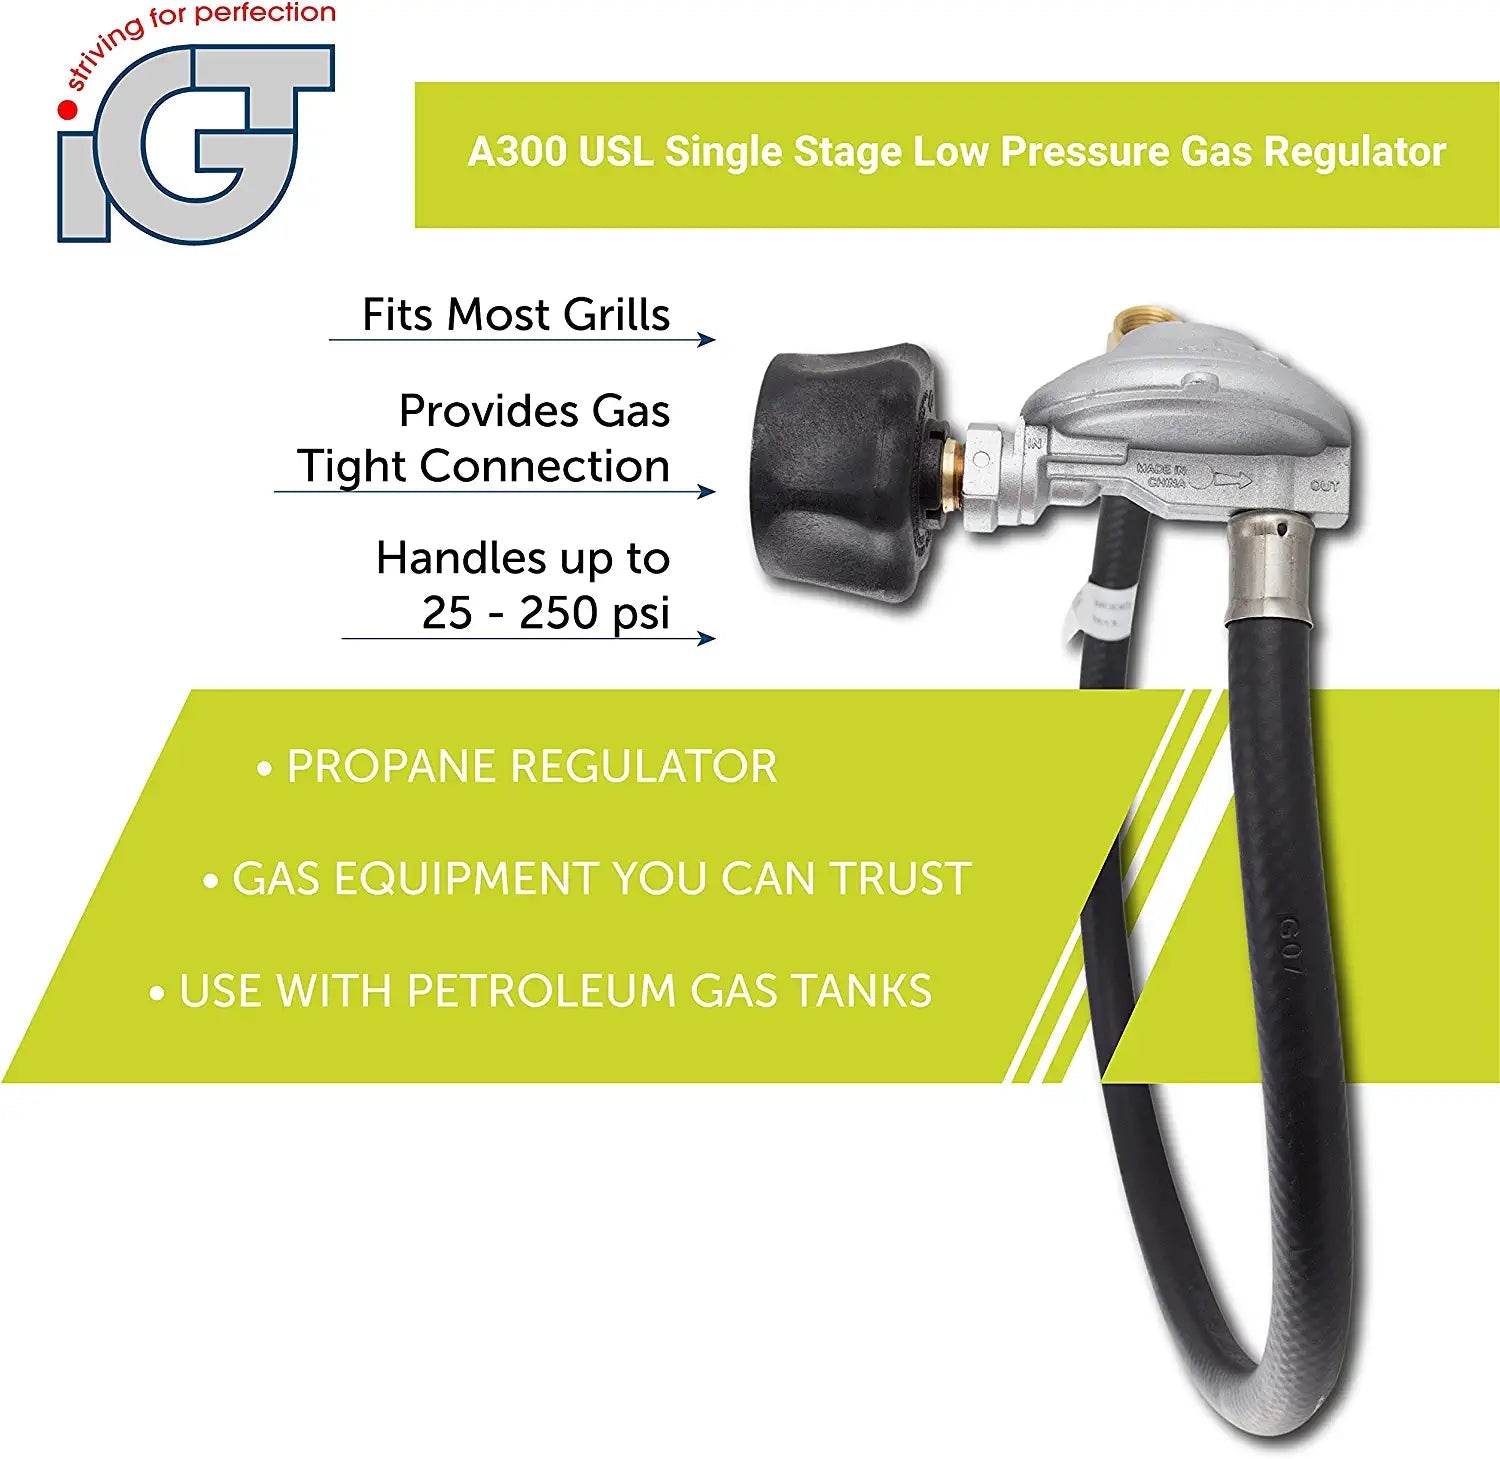 IGT 2 feet Gas Regulator | QCC-1 Propane Regulator (70000 BTU) for Barbecue Grill, Camping Stove, Patio Heater, Fish Cooker & Other Small Gas Appliances, 2 ft Hose - Hatke